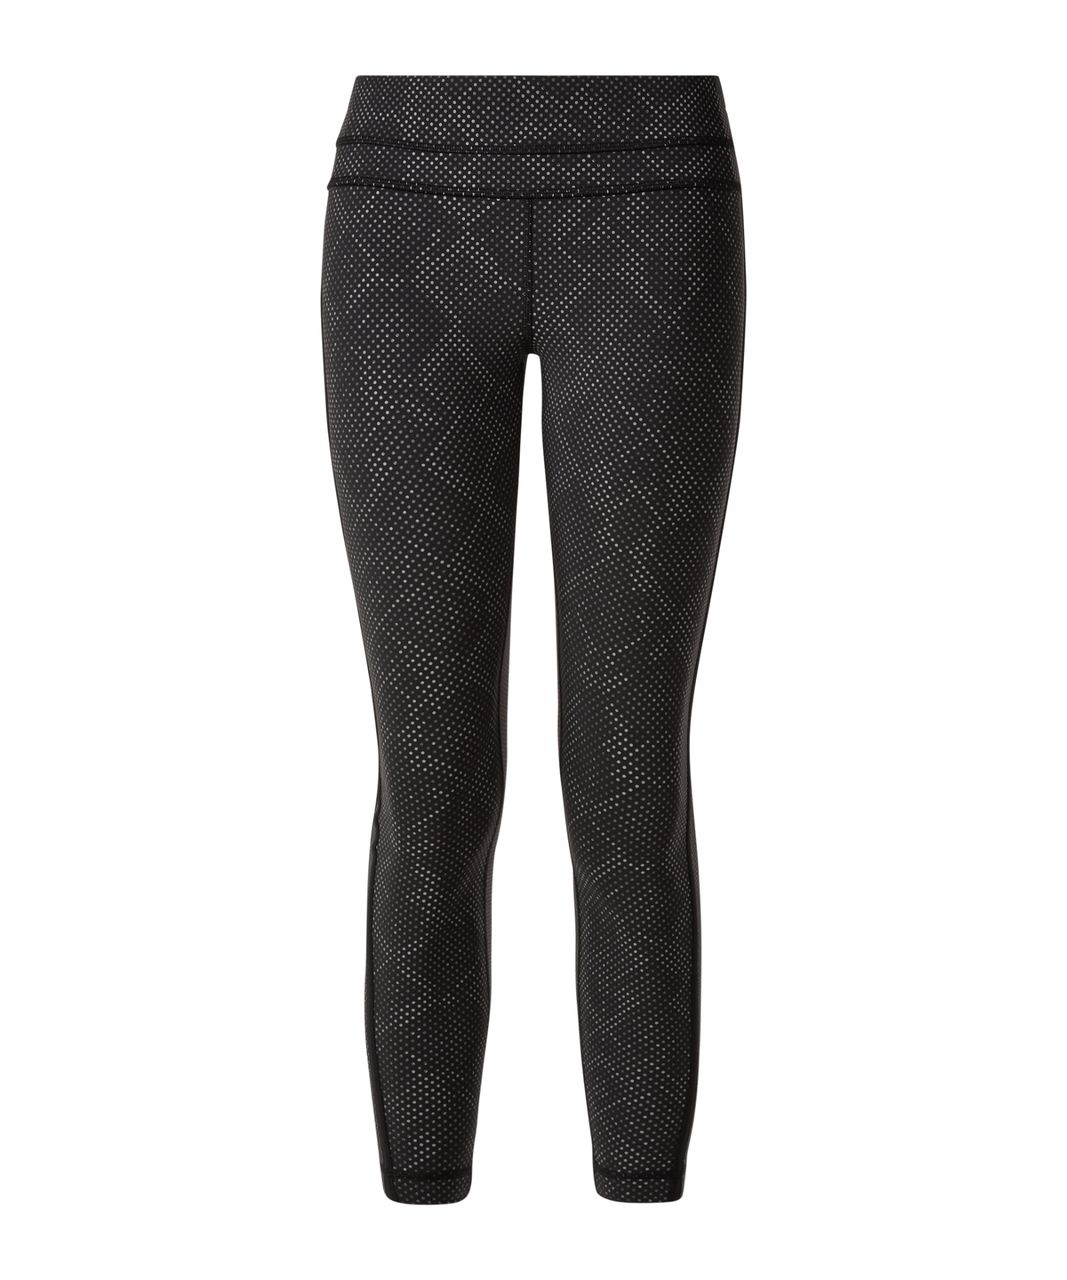 Lululemon Pace Tight (Full-On Luxtreme) *Lights Out - Black